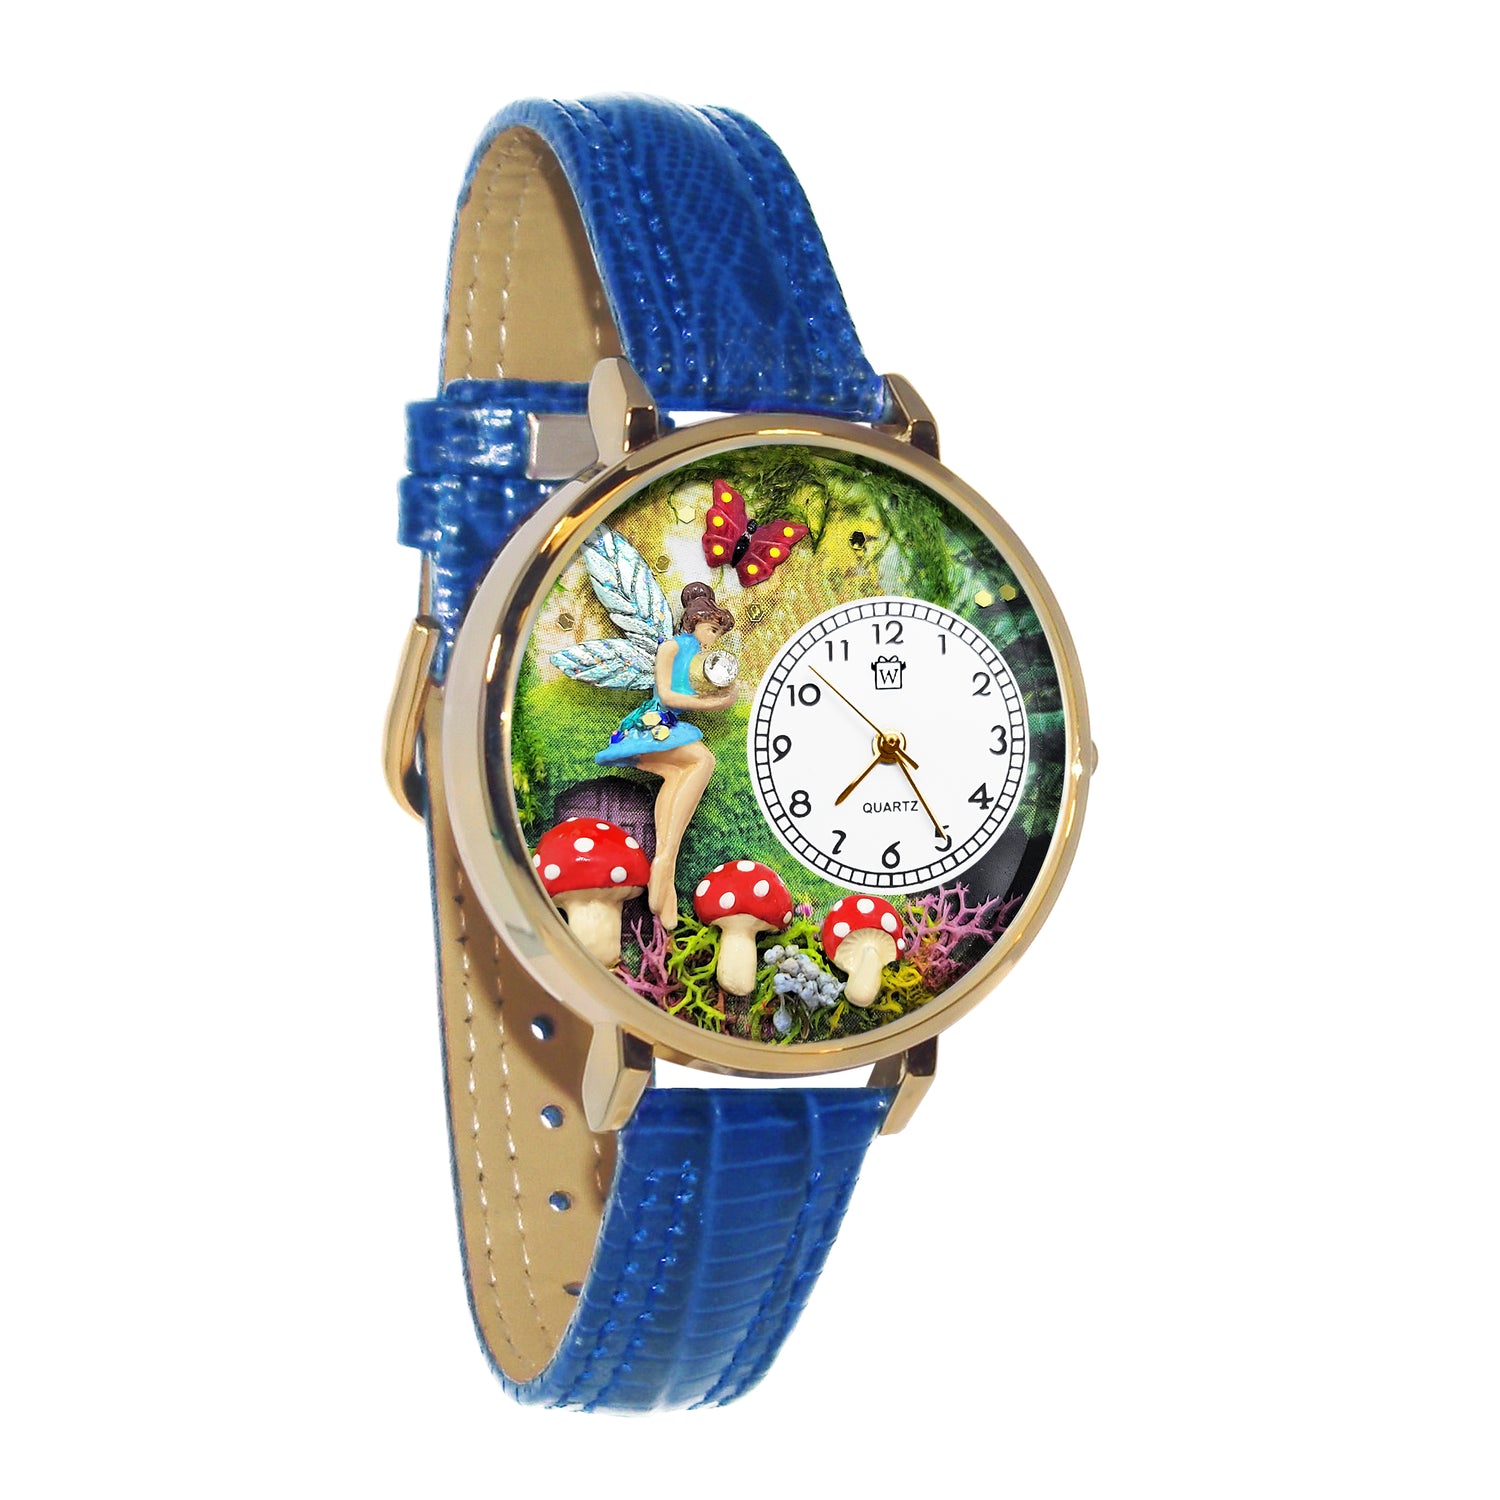 Whimsical Gifts | Fairy 3D Watch Large Style | Handmade in USA | Fantasy & Mystical |  | Novelty Unique Fun Miniatures Gift | Gold Finish Royal Blue Leather Watch Band